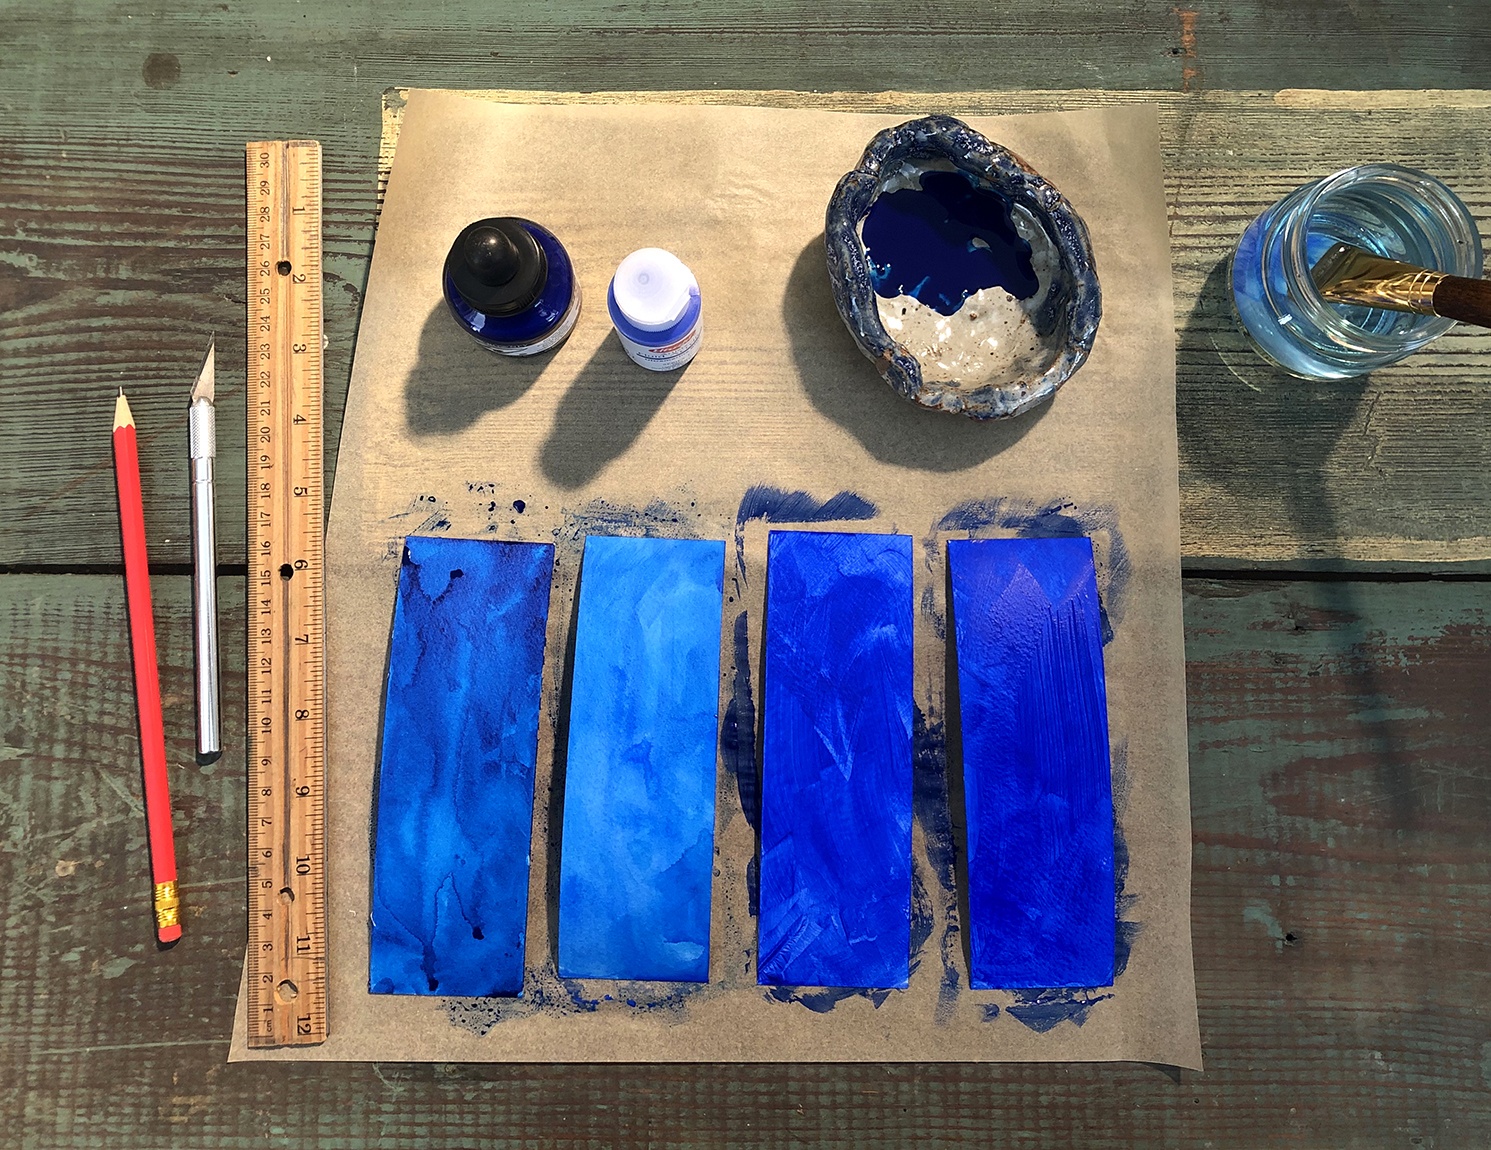 Four strips of ultramarine-painted paper, surrounded by supplies for the activity.